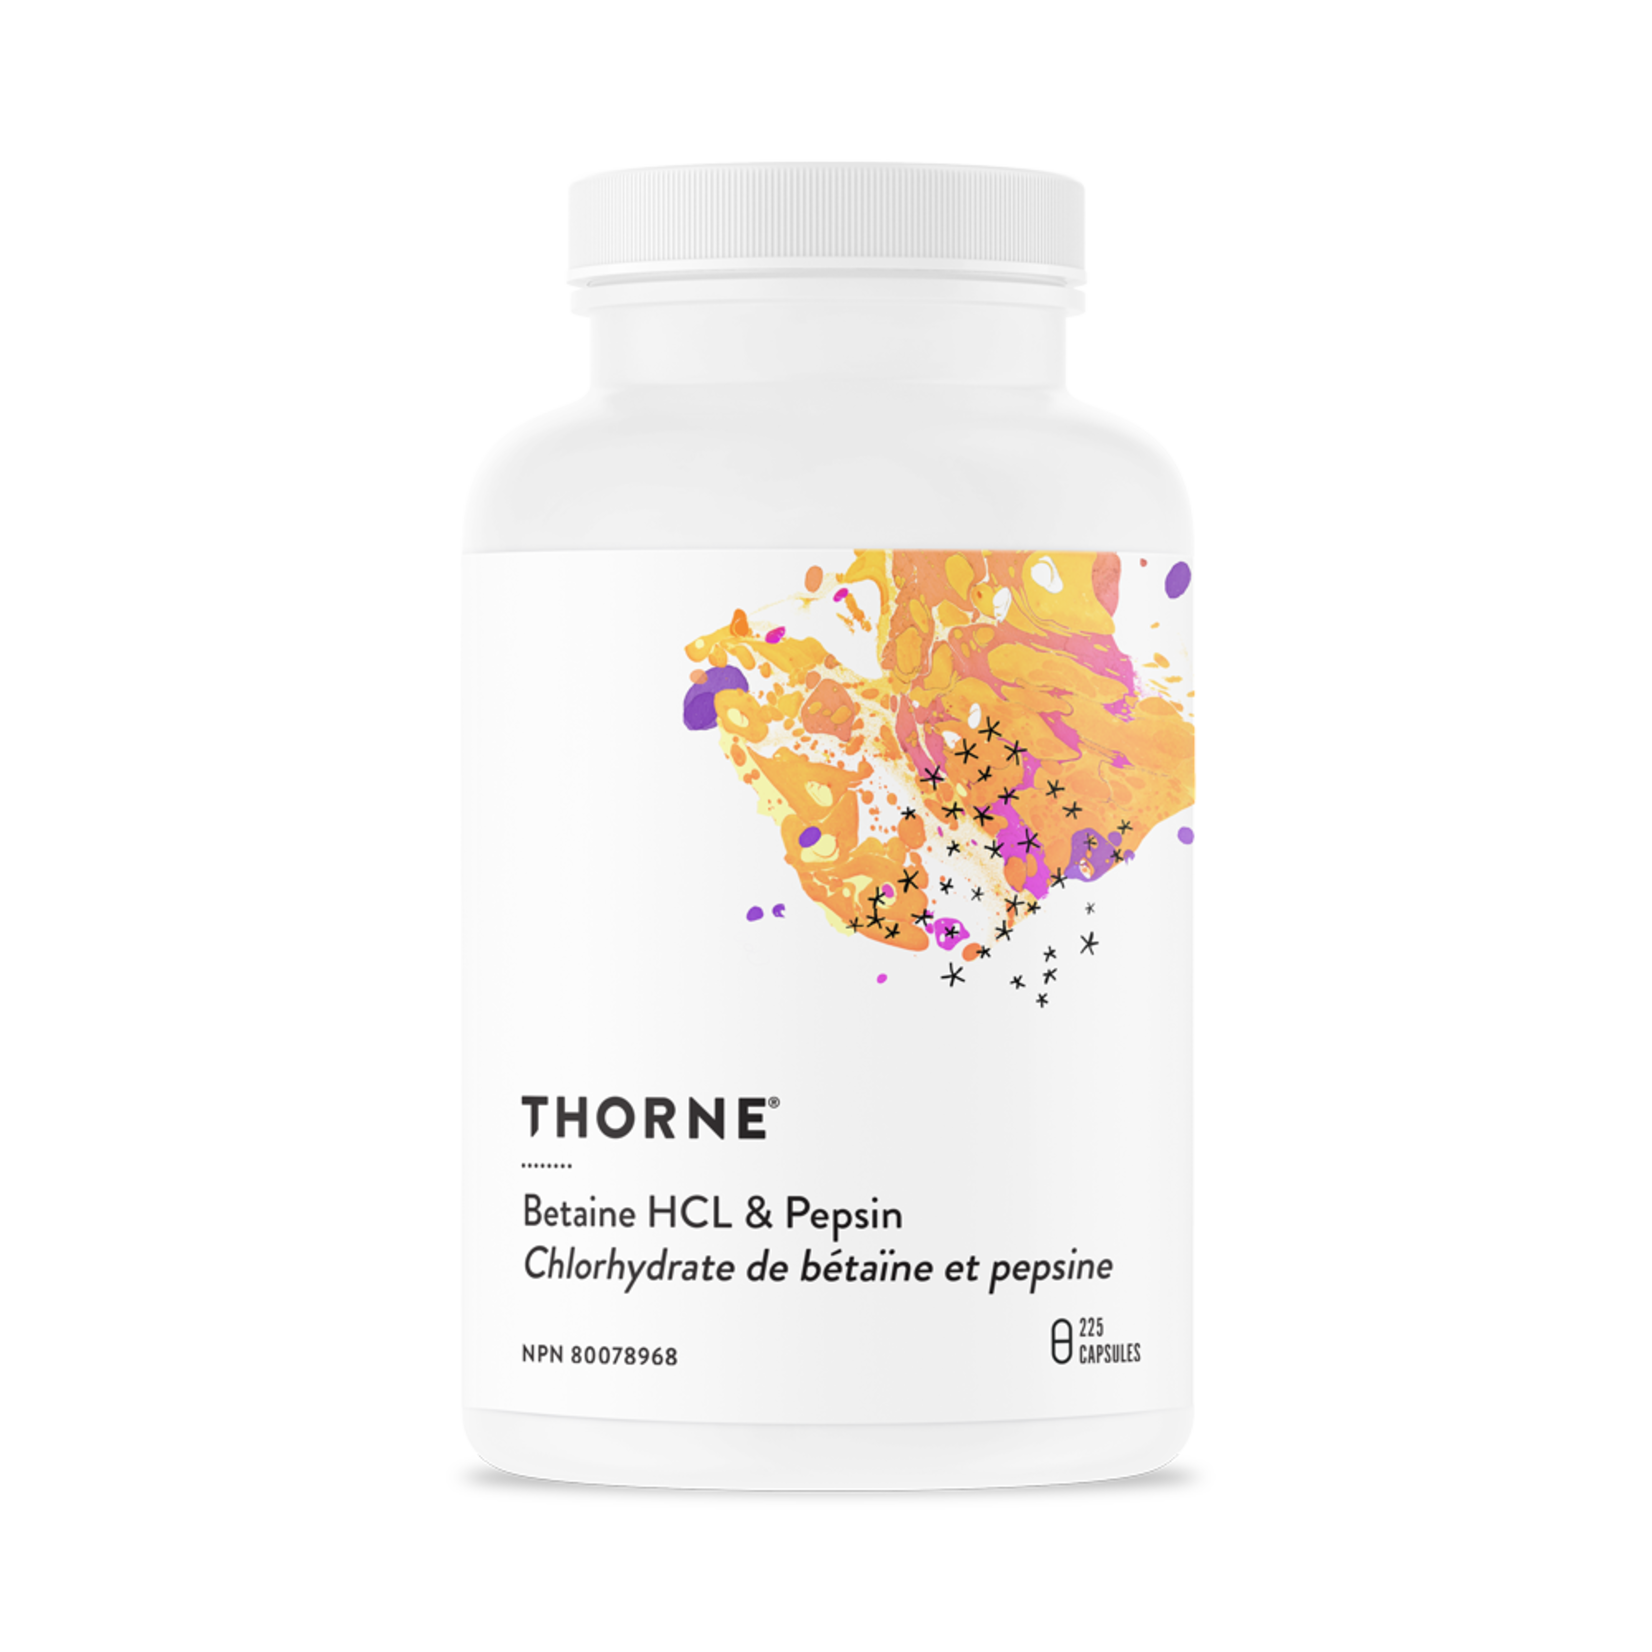 THORNE RESEARCH THORNE BETAINE HCL & PEPSIN 225 VEGICAPS